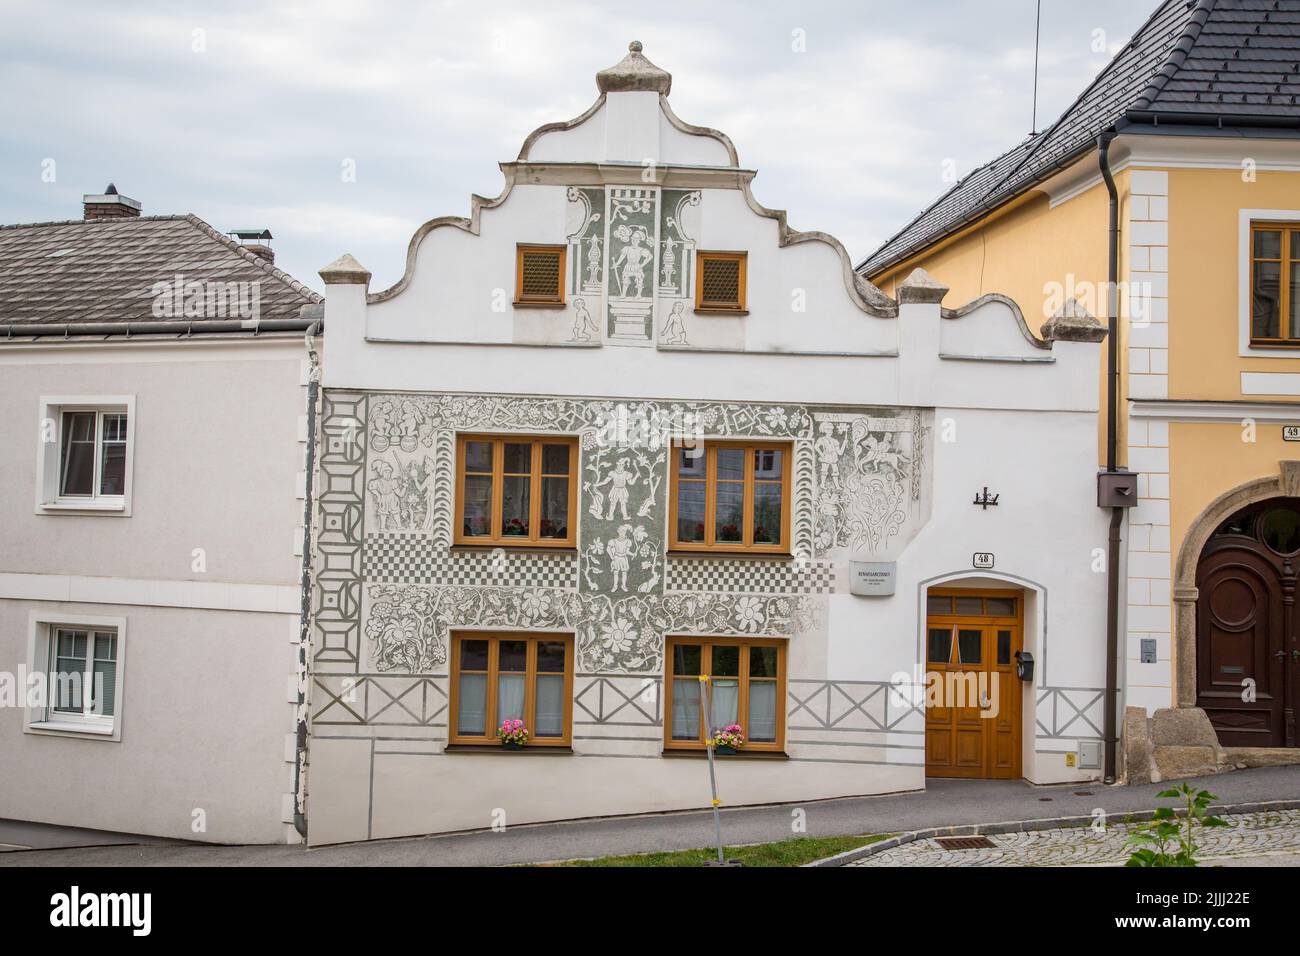 Sgraffito house in Weitra/ Waldviertel, the oldest brewery town of Austria Stock Photo